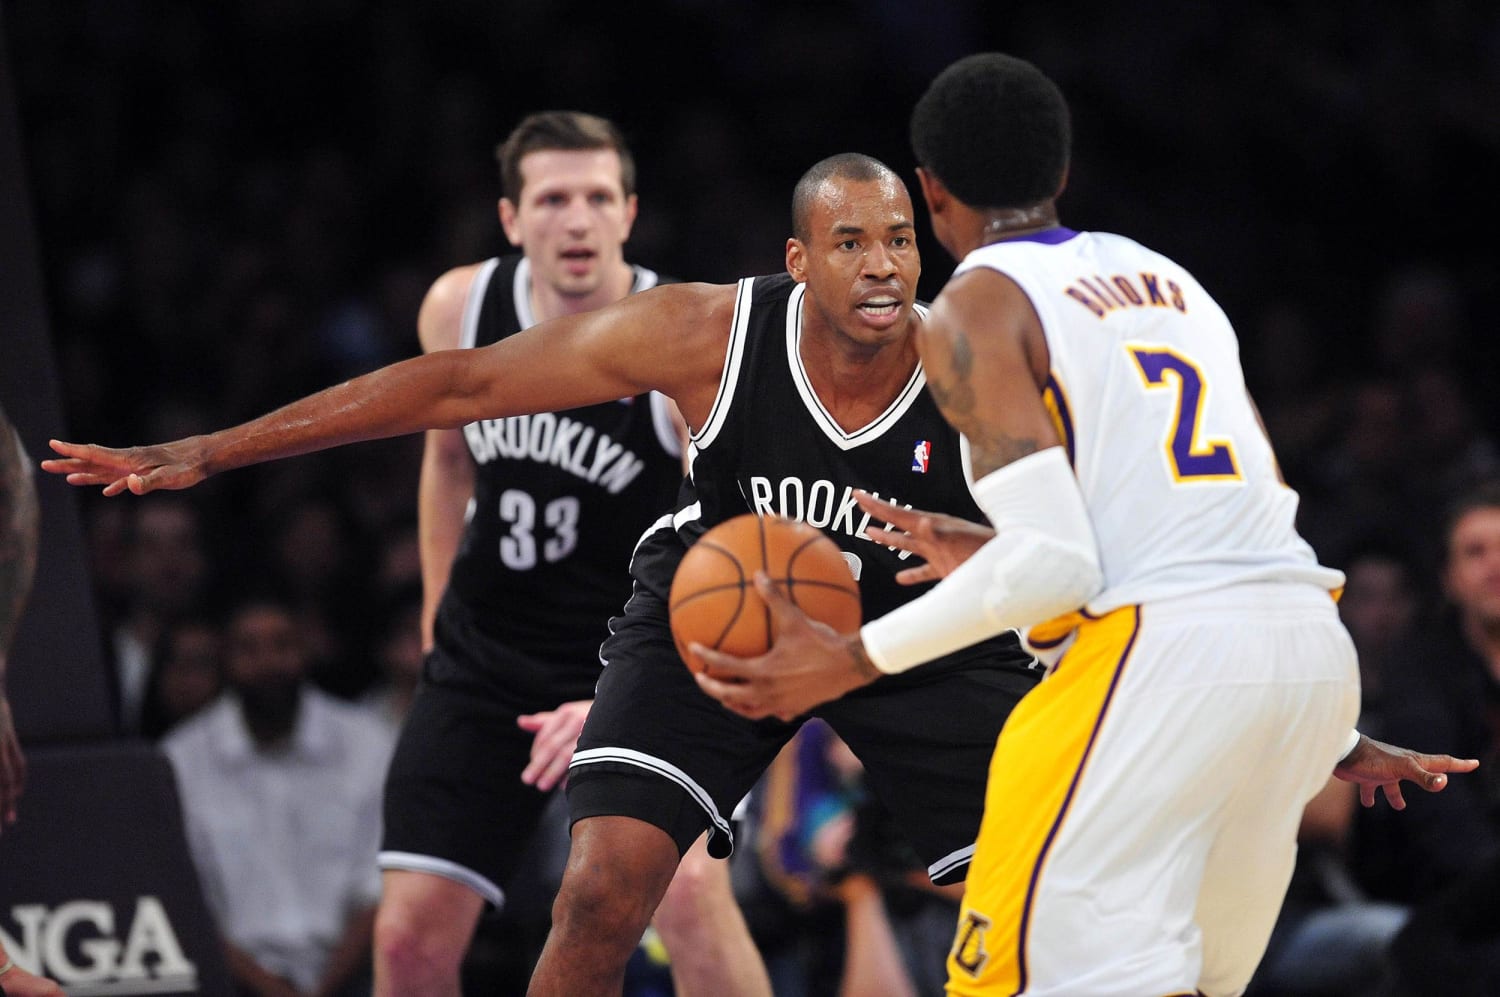 Jason Collins, openly gay player, signs with Nets